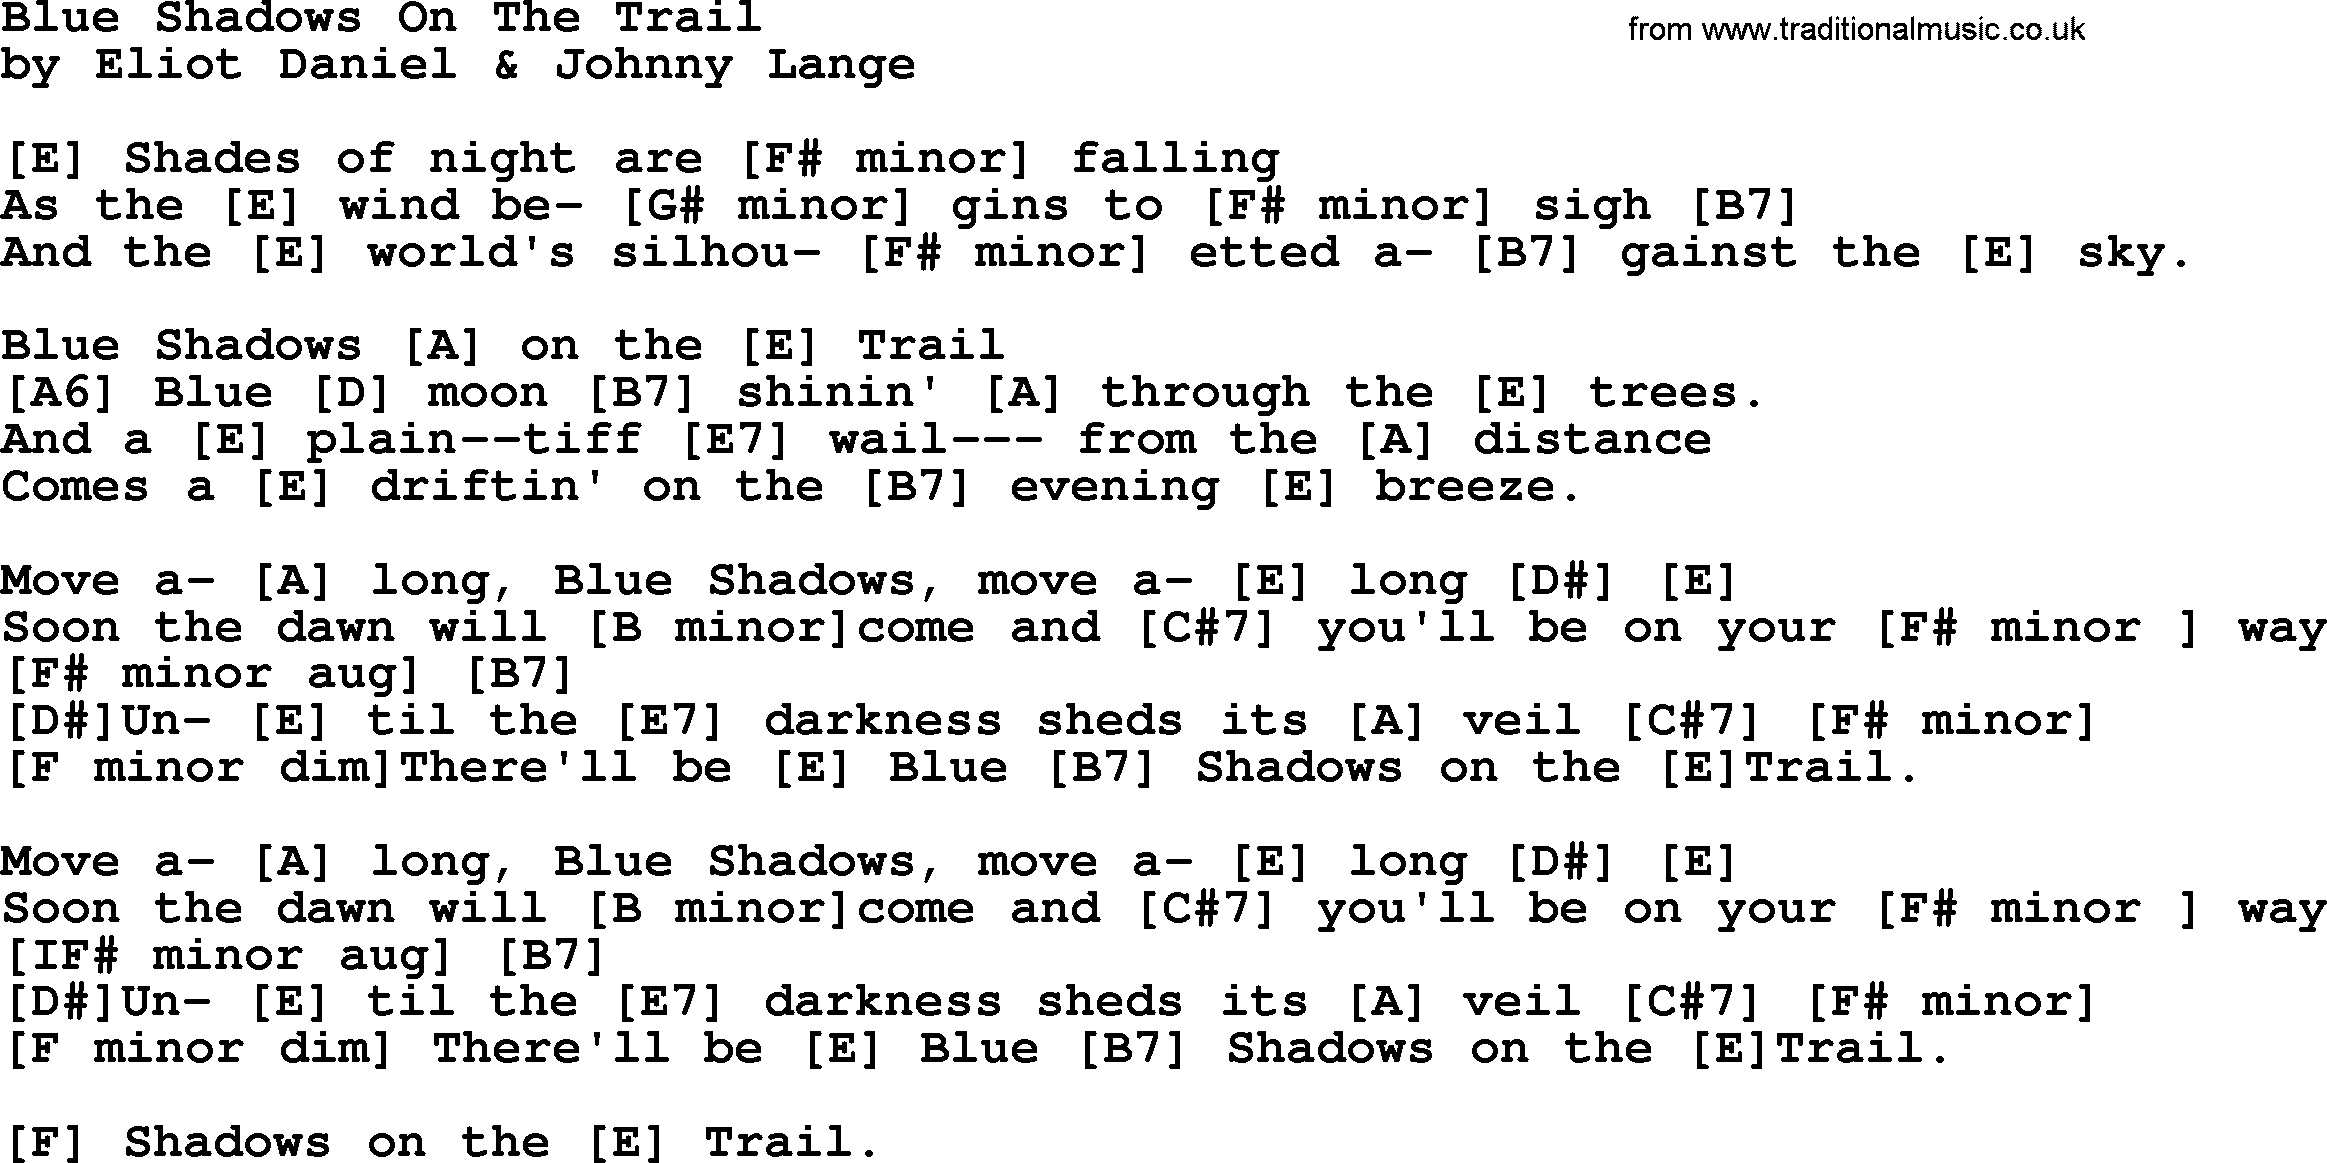 Bluegrass song: Blue Shadows On The Trail, lyrics and chords